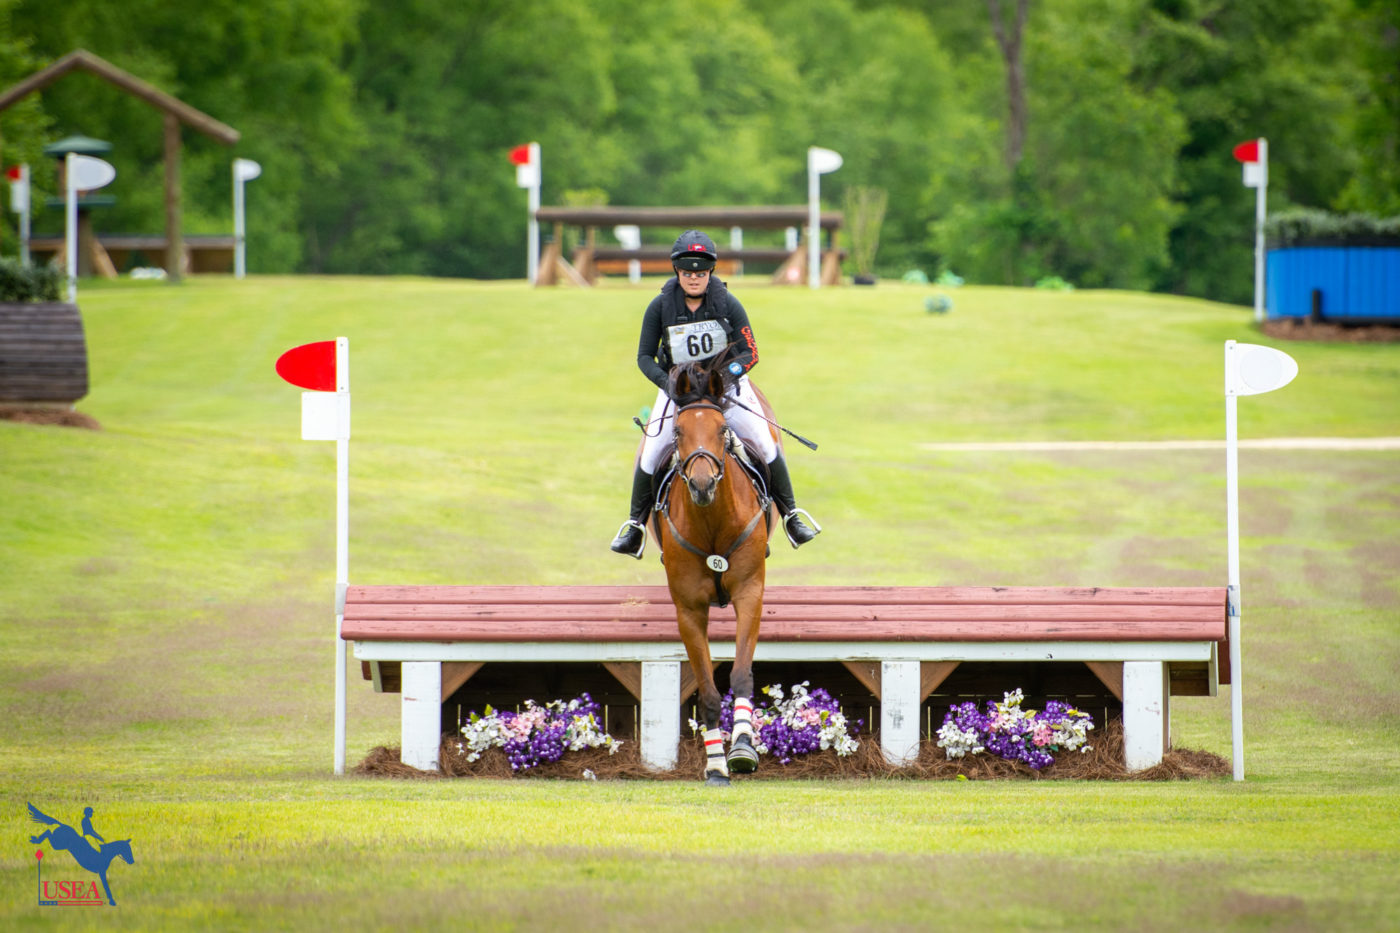 Lauren Meyers and SW Cooley Wineport rode for UGA. USEA/Shelby Allen photo